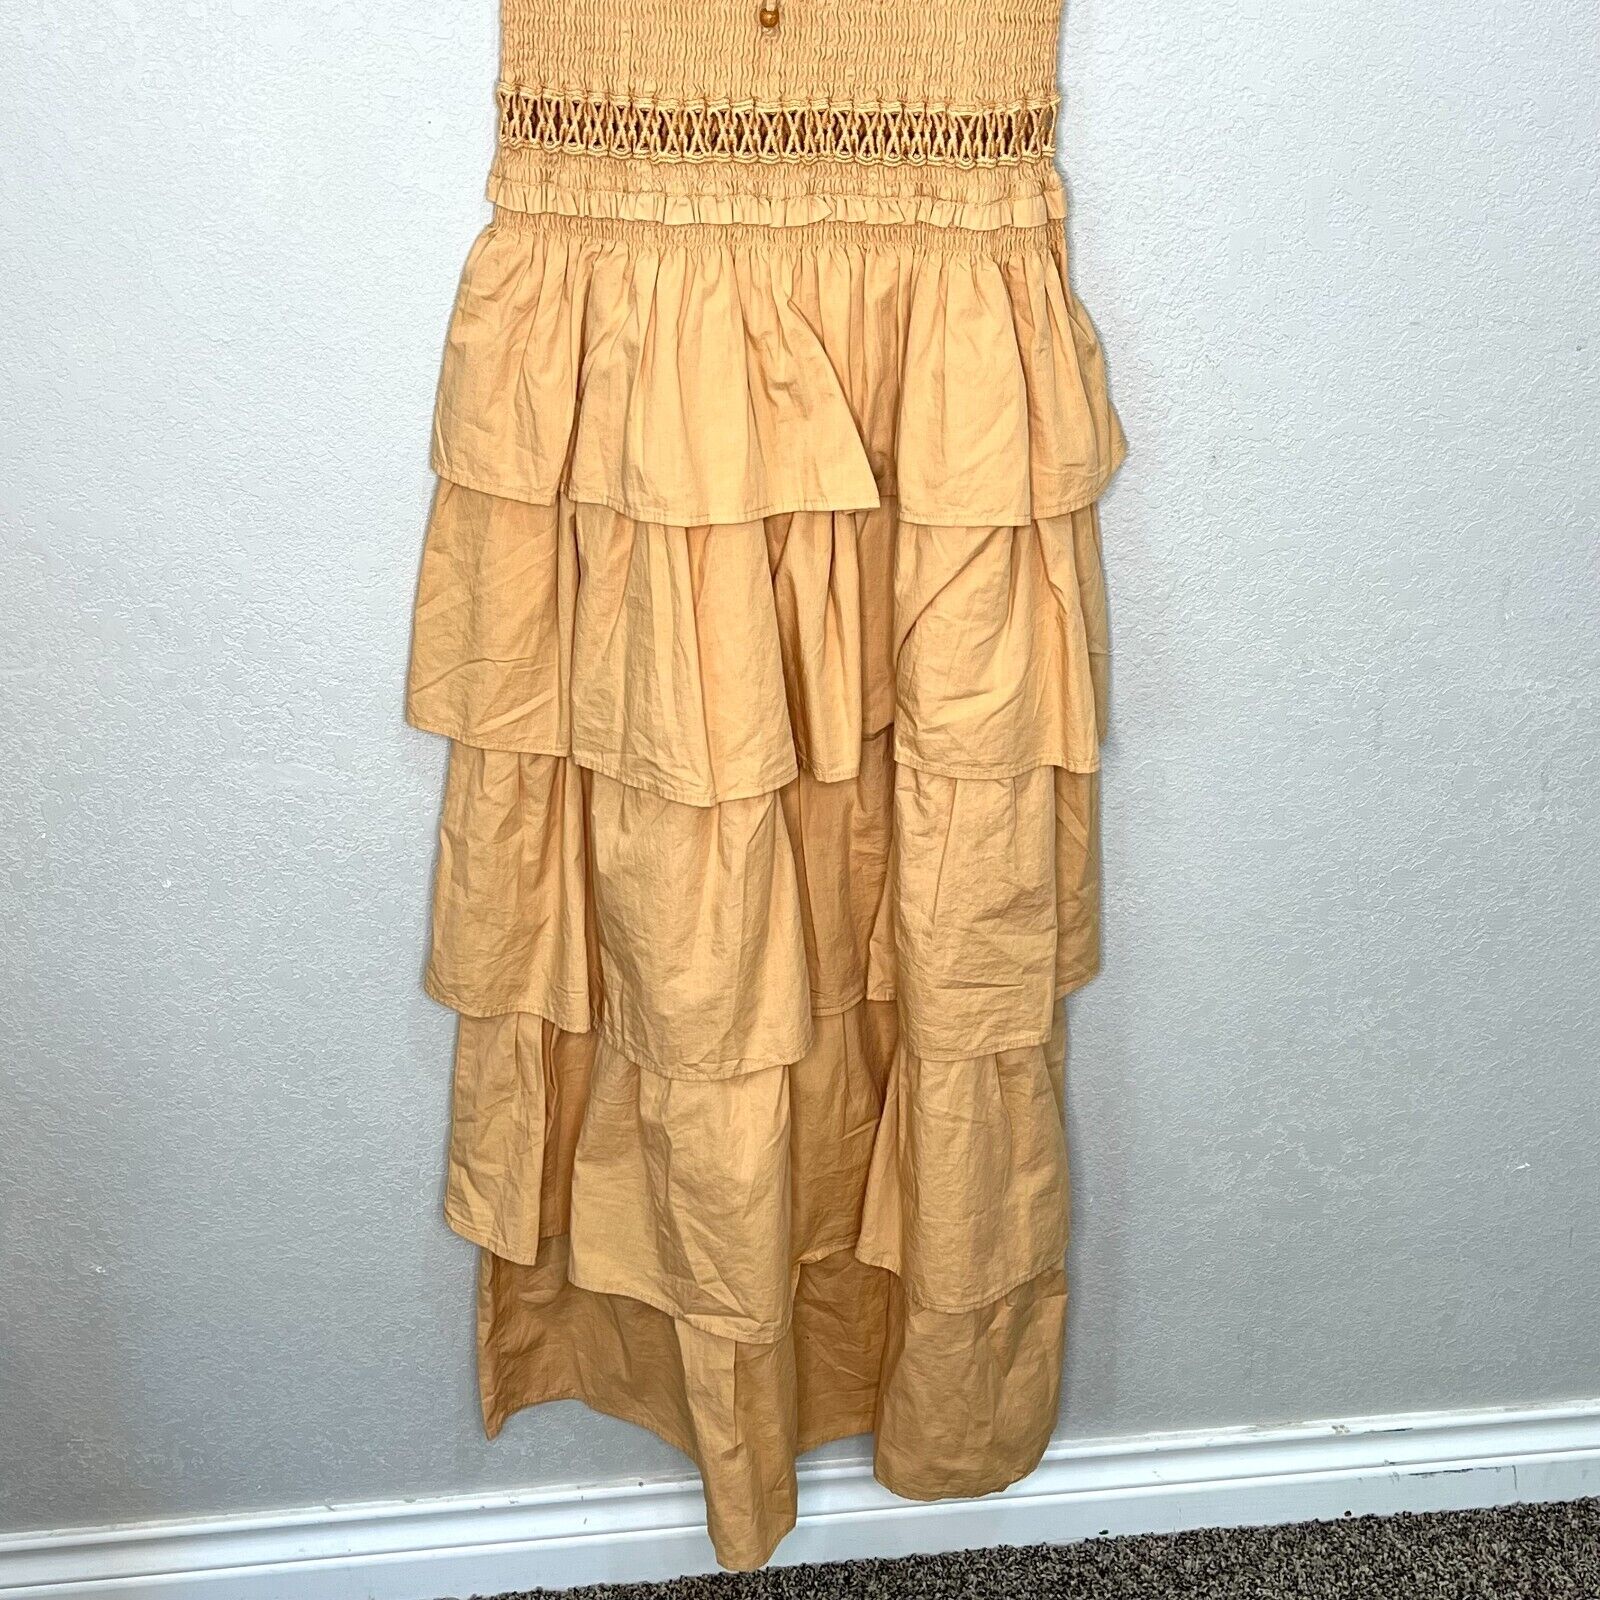 Free People Peach Smocked Tier Ruffle Sunset Dancing Dress Size Small NEW $128